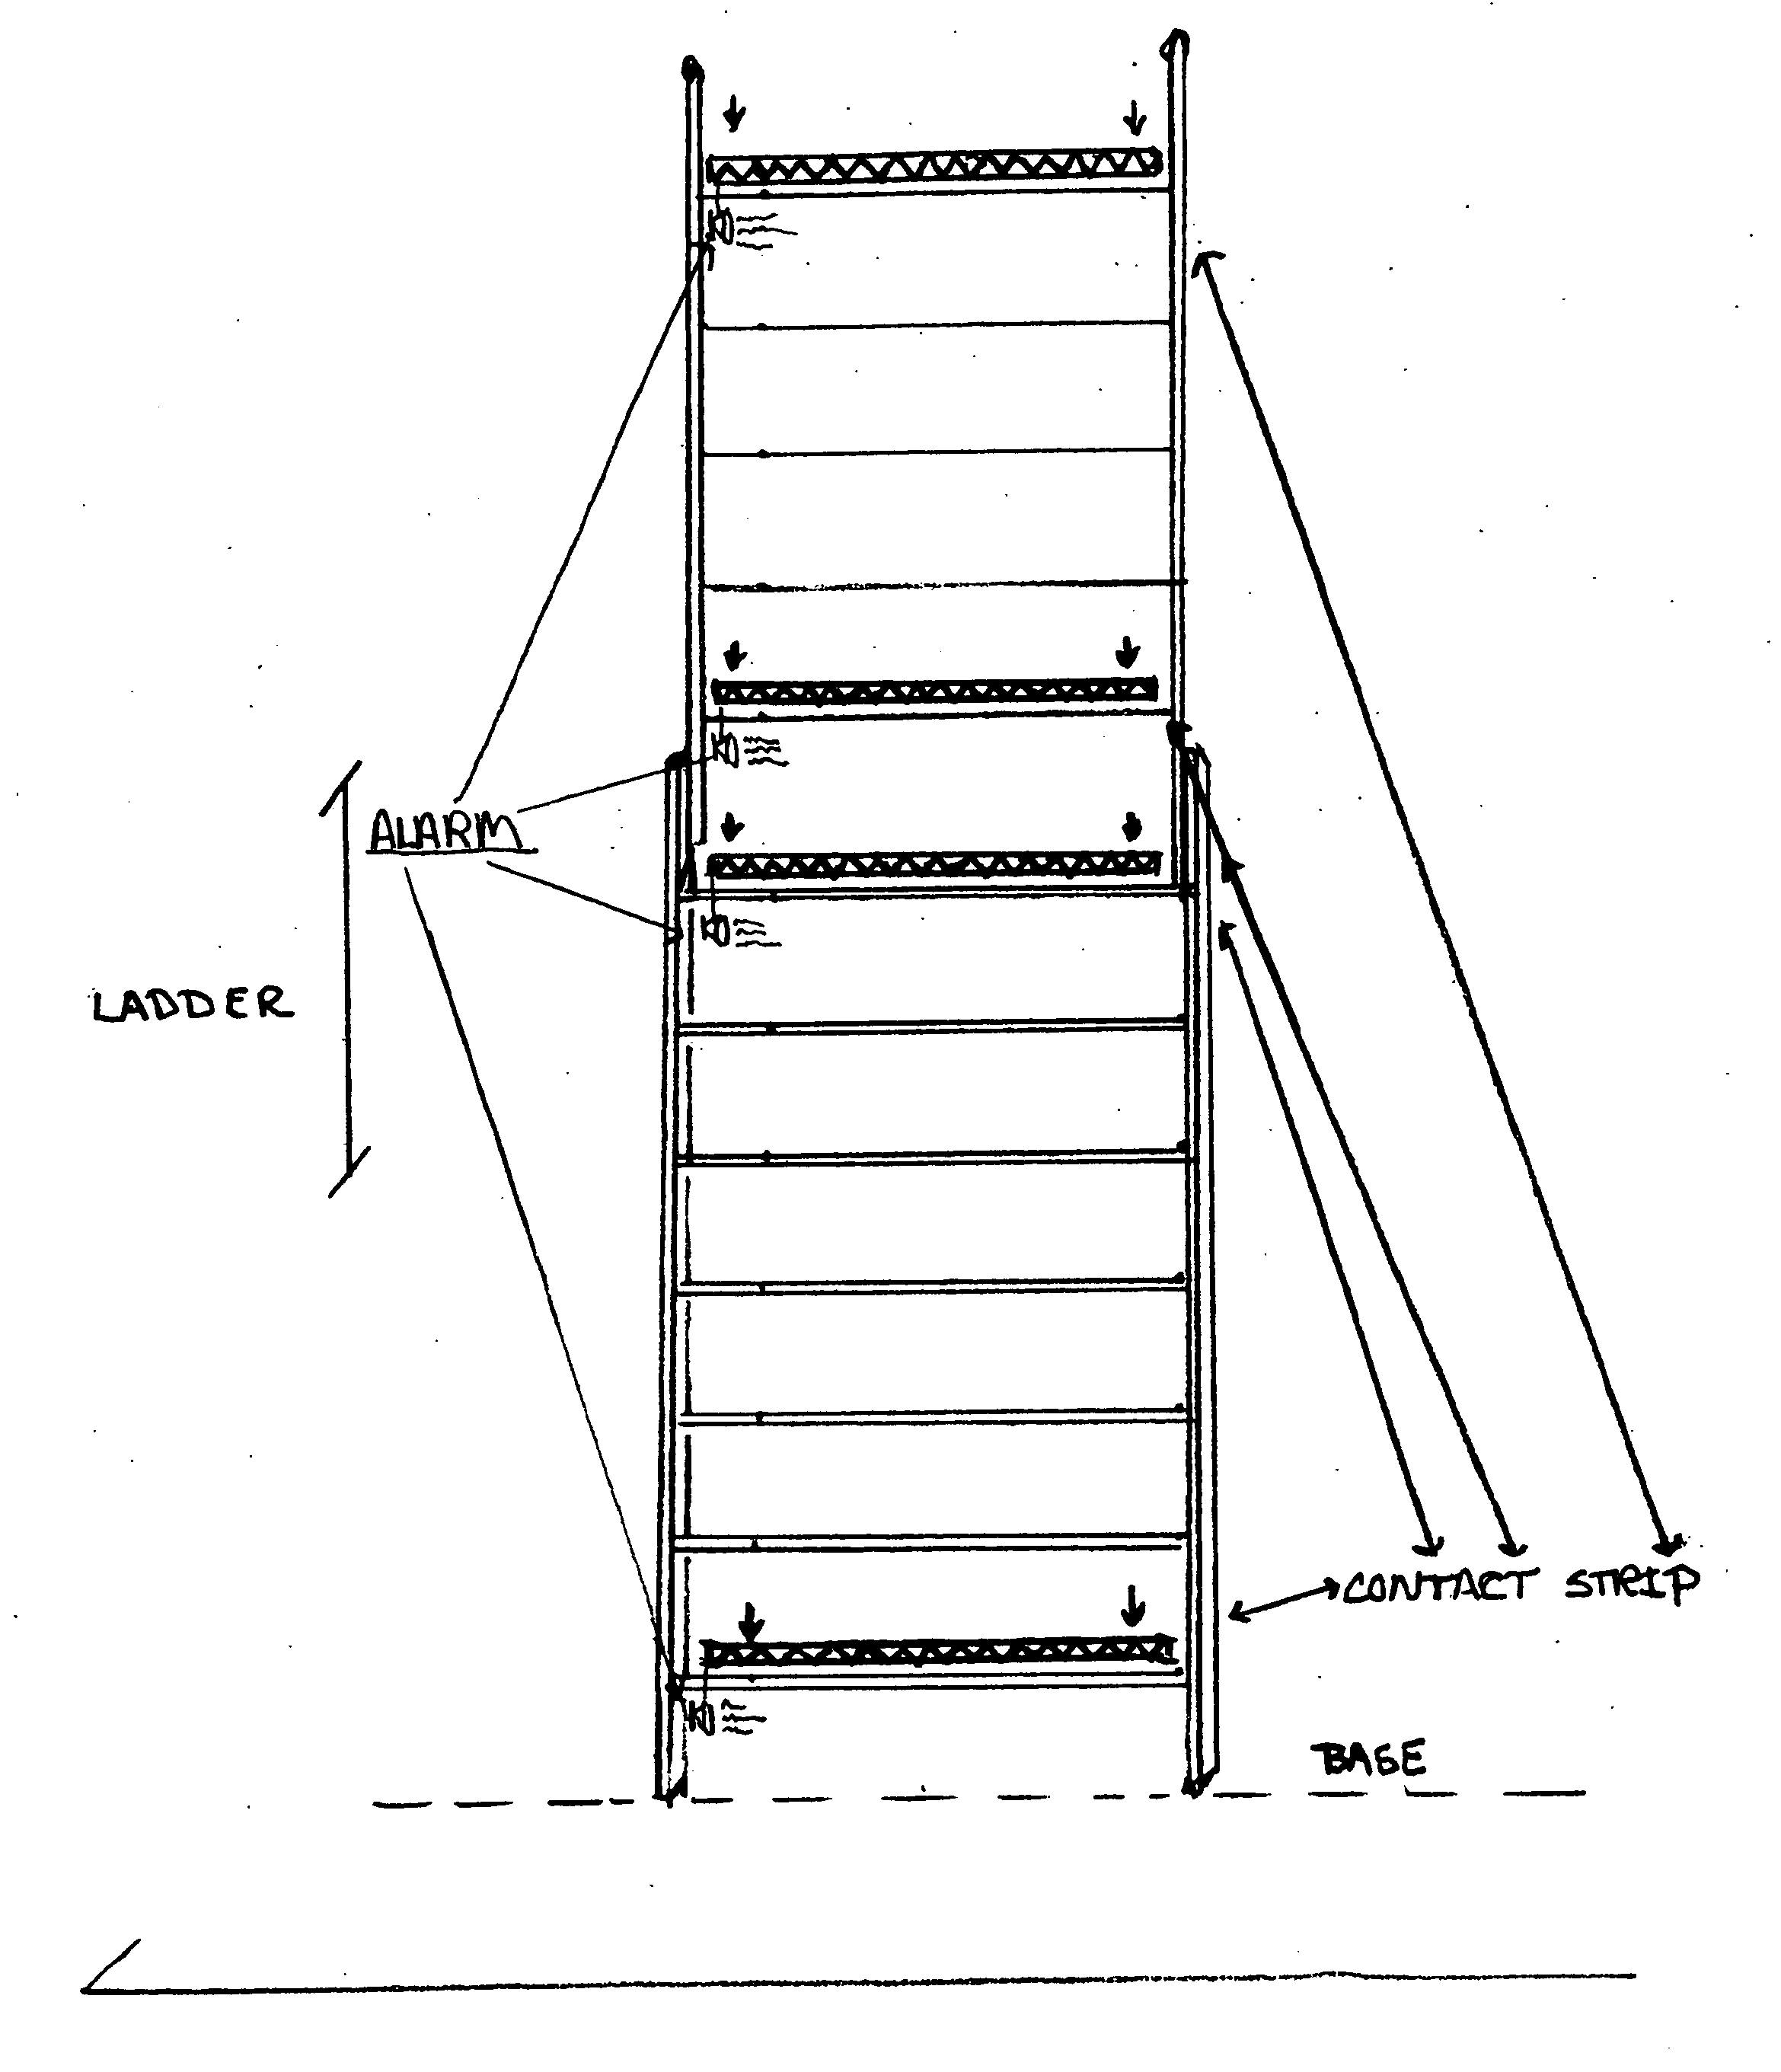 System and method for providing a warning to ladder users of potentially hazardous steps